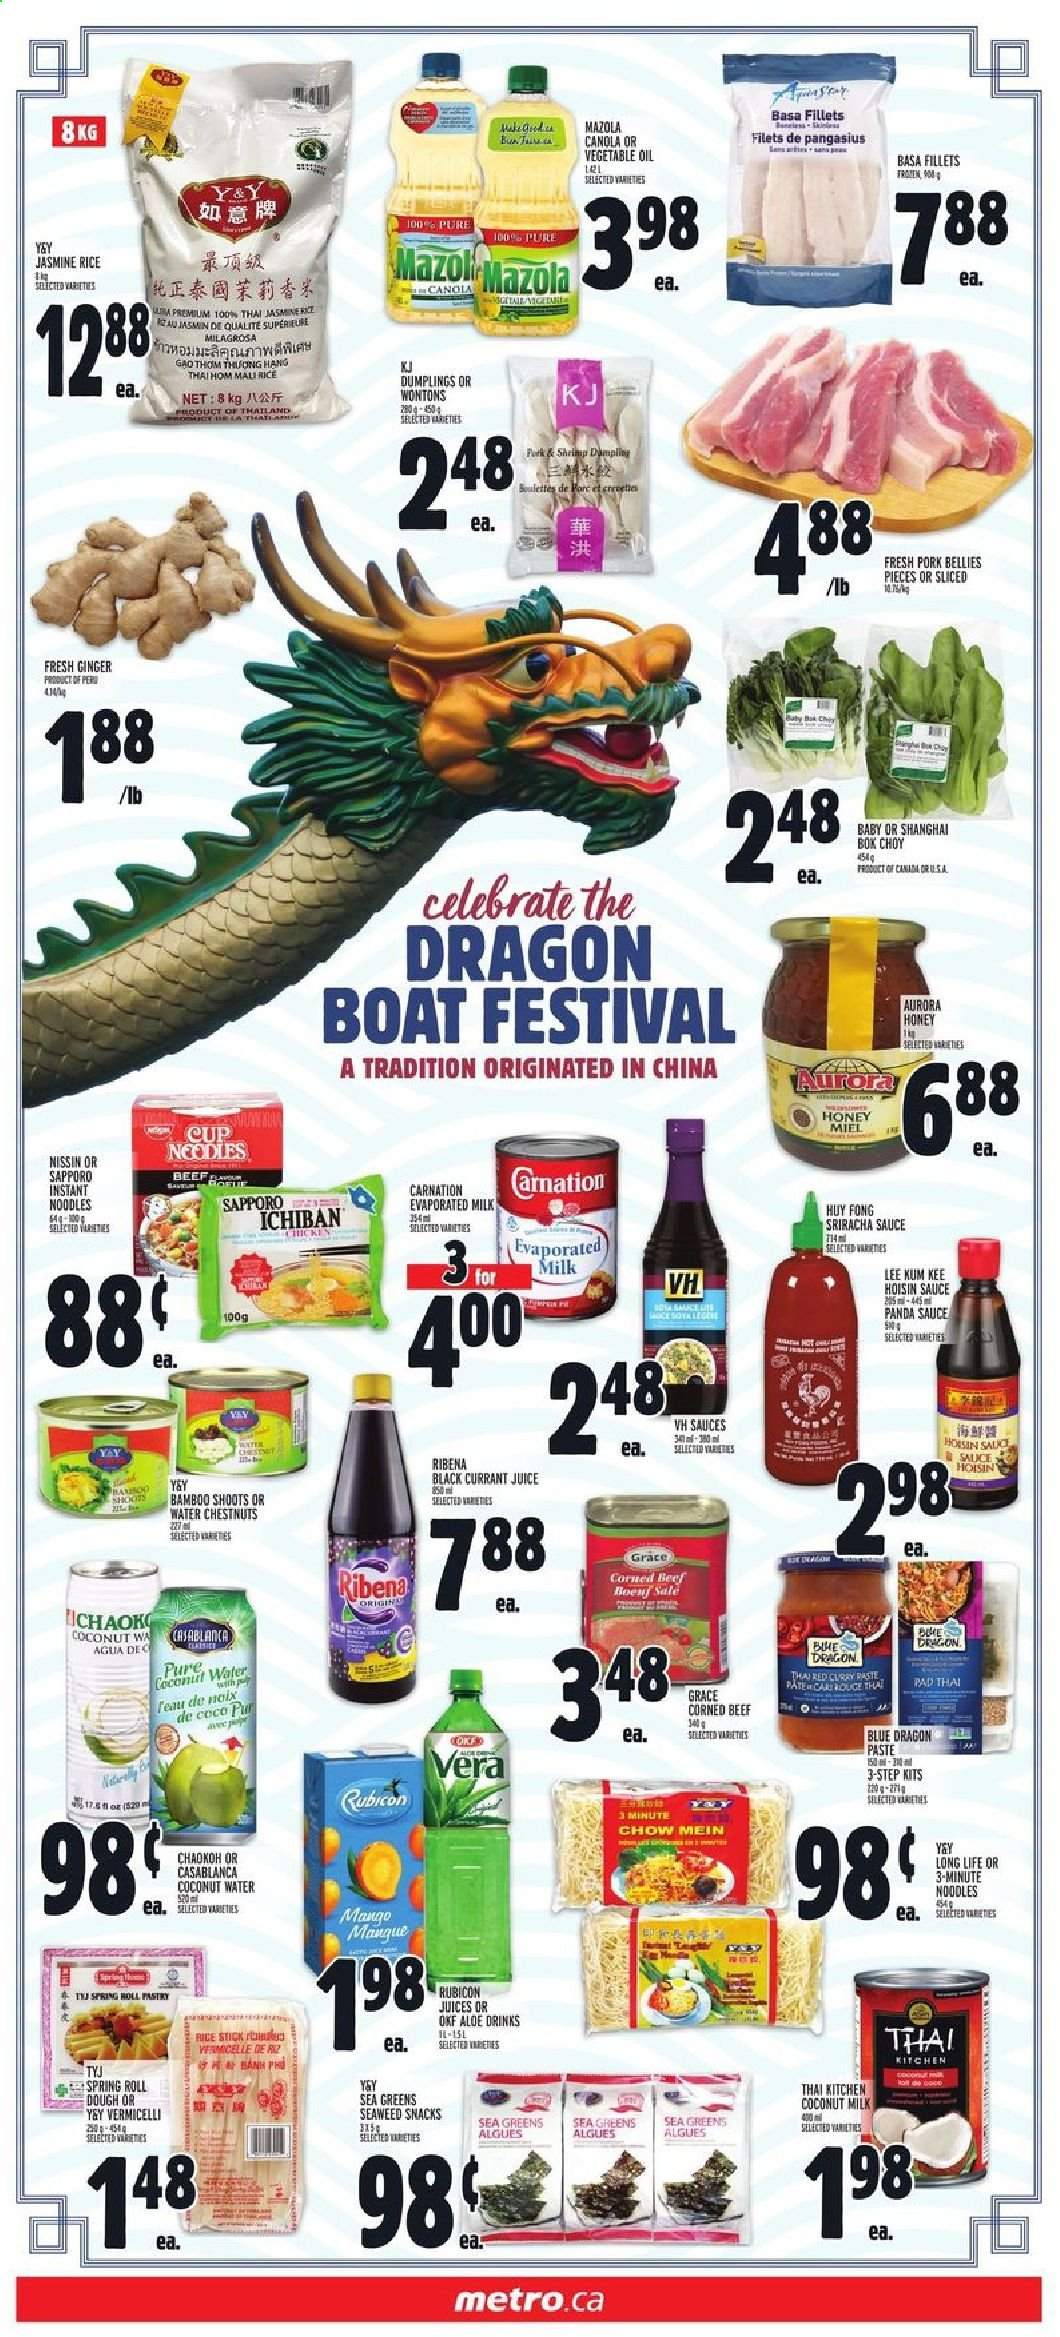 thumbnail - Metro Flyer - June 03, 2021 - June 09, 2021 - Sales products - bok choy, ginger, pangasius, shrimps, instant noodles, dumplings, noodles cup, noodles, Nissin, red curry, corned beef, evaporated milk, wafers, snack, bamboo shoot, coconut milk, water chestnuts, rice, jasmine rice, curry paste, sriracha, hoisin sauce, Lee Kum Kee, oil, honey, juice, coconut water, beef meat, pork belly. Page 9.